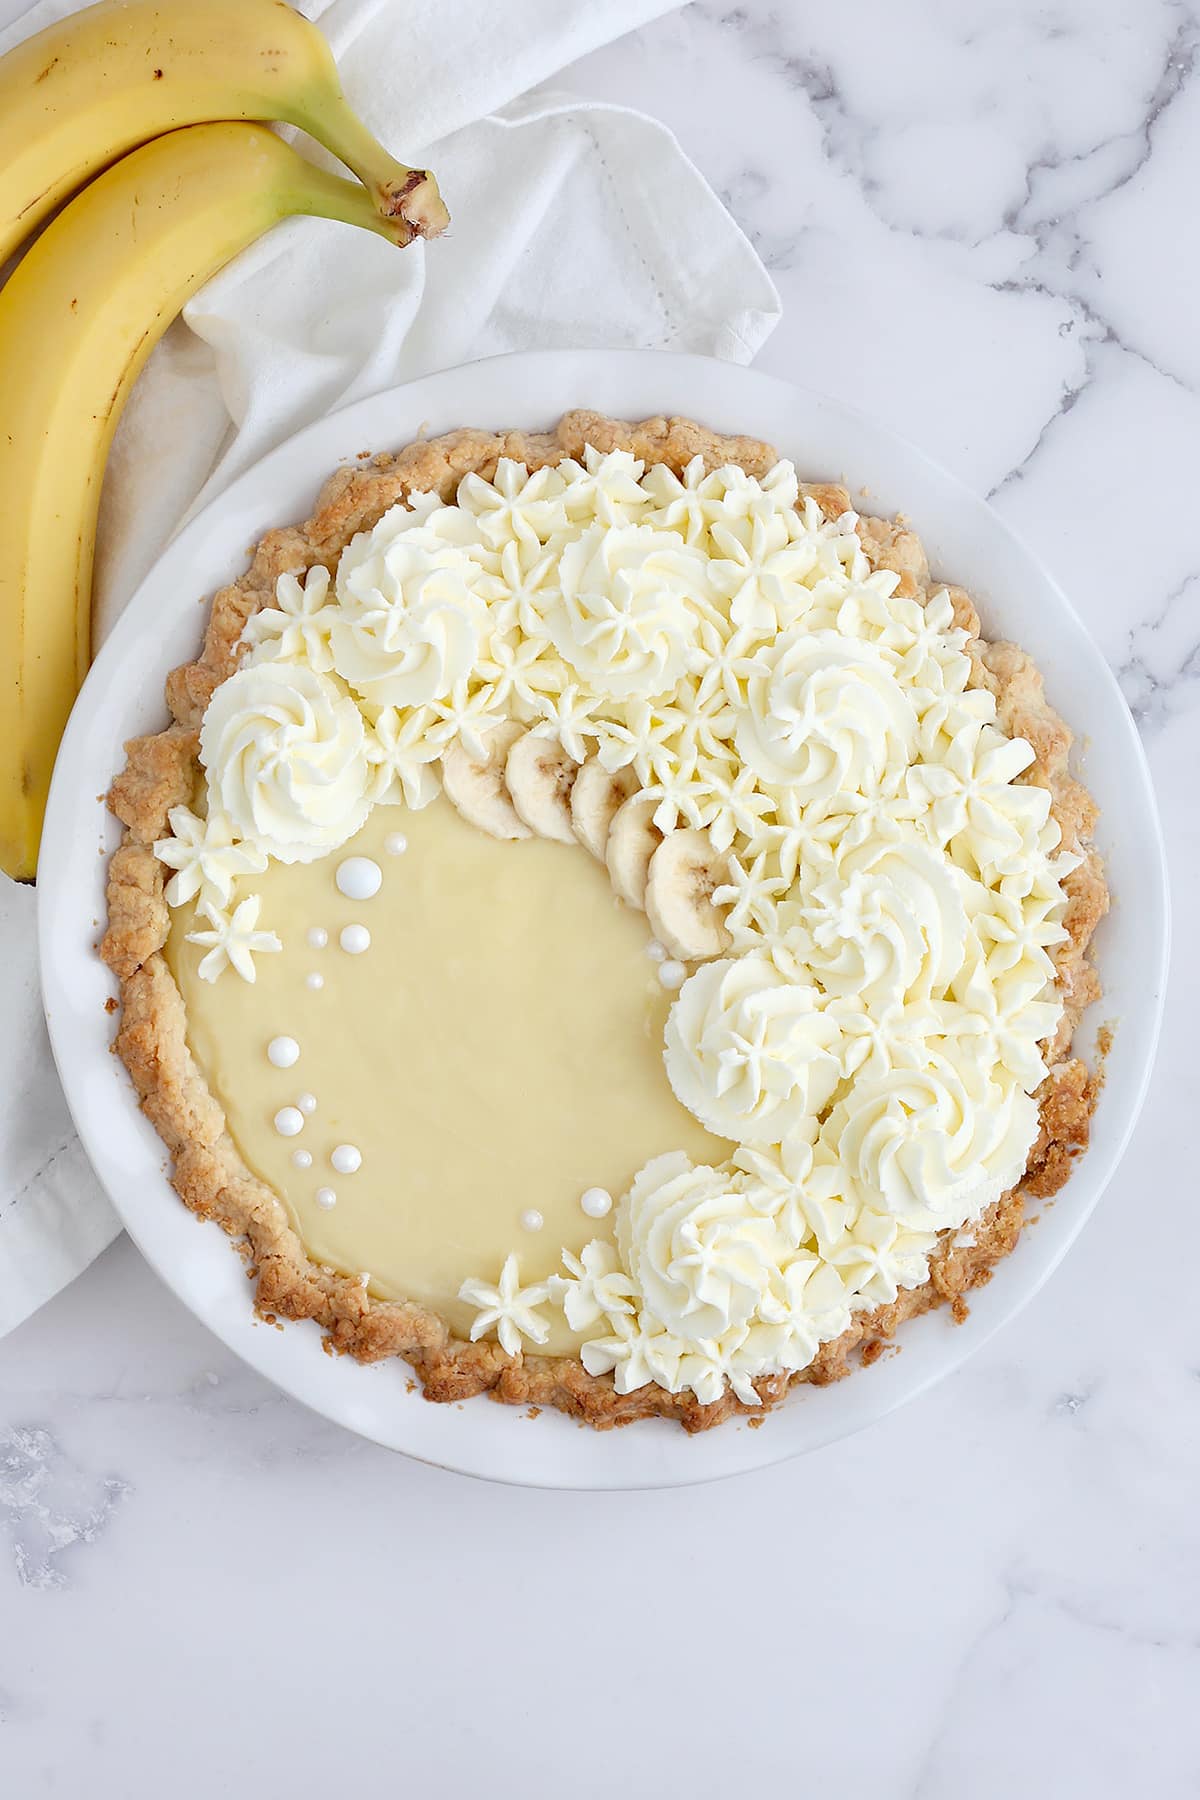 A banana cream pie topped with whipped cream in a white ceramic pie dish.